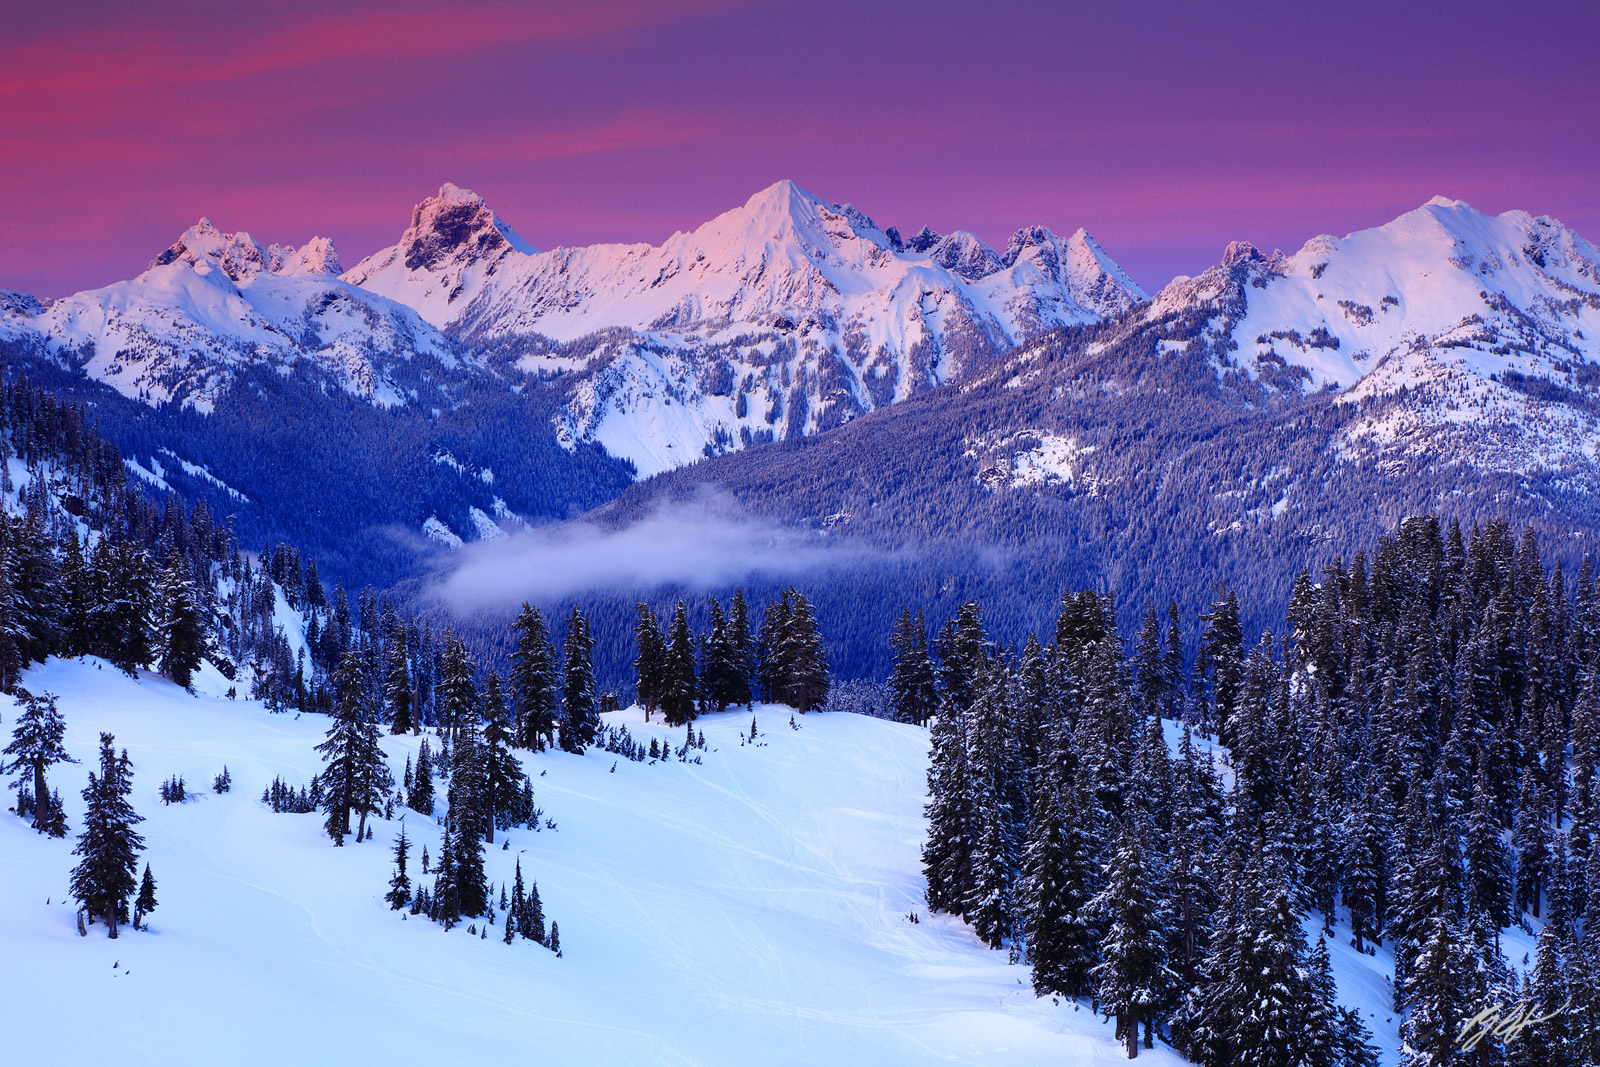 Winter Sunset Over the north Cascades from Artist Ridge in the Mt Baker National Recreation Area in Washington